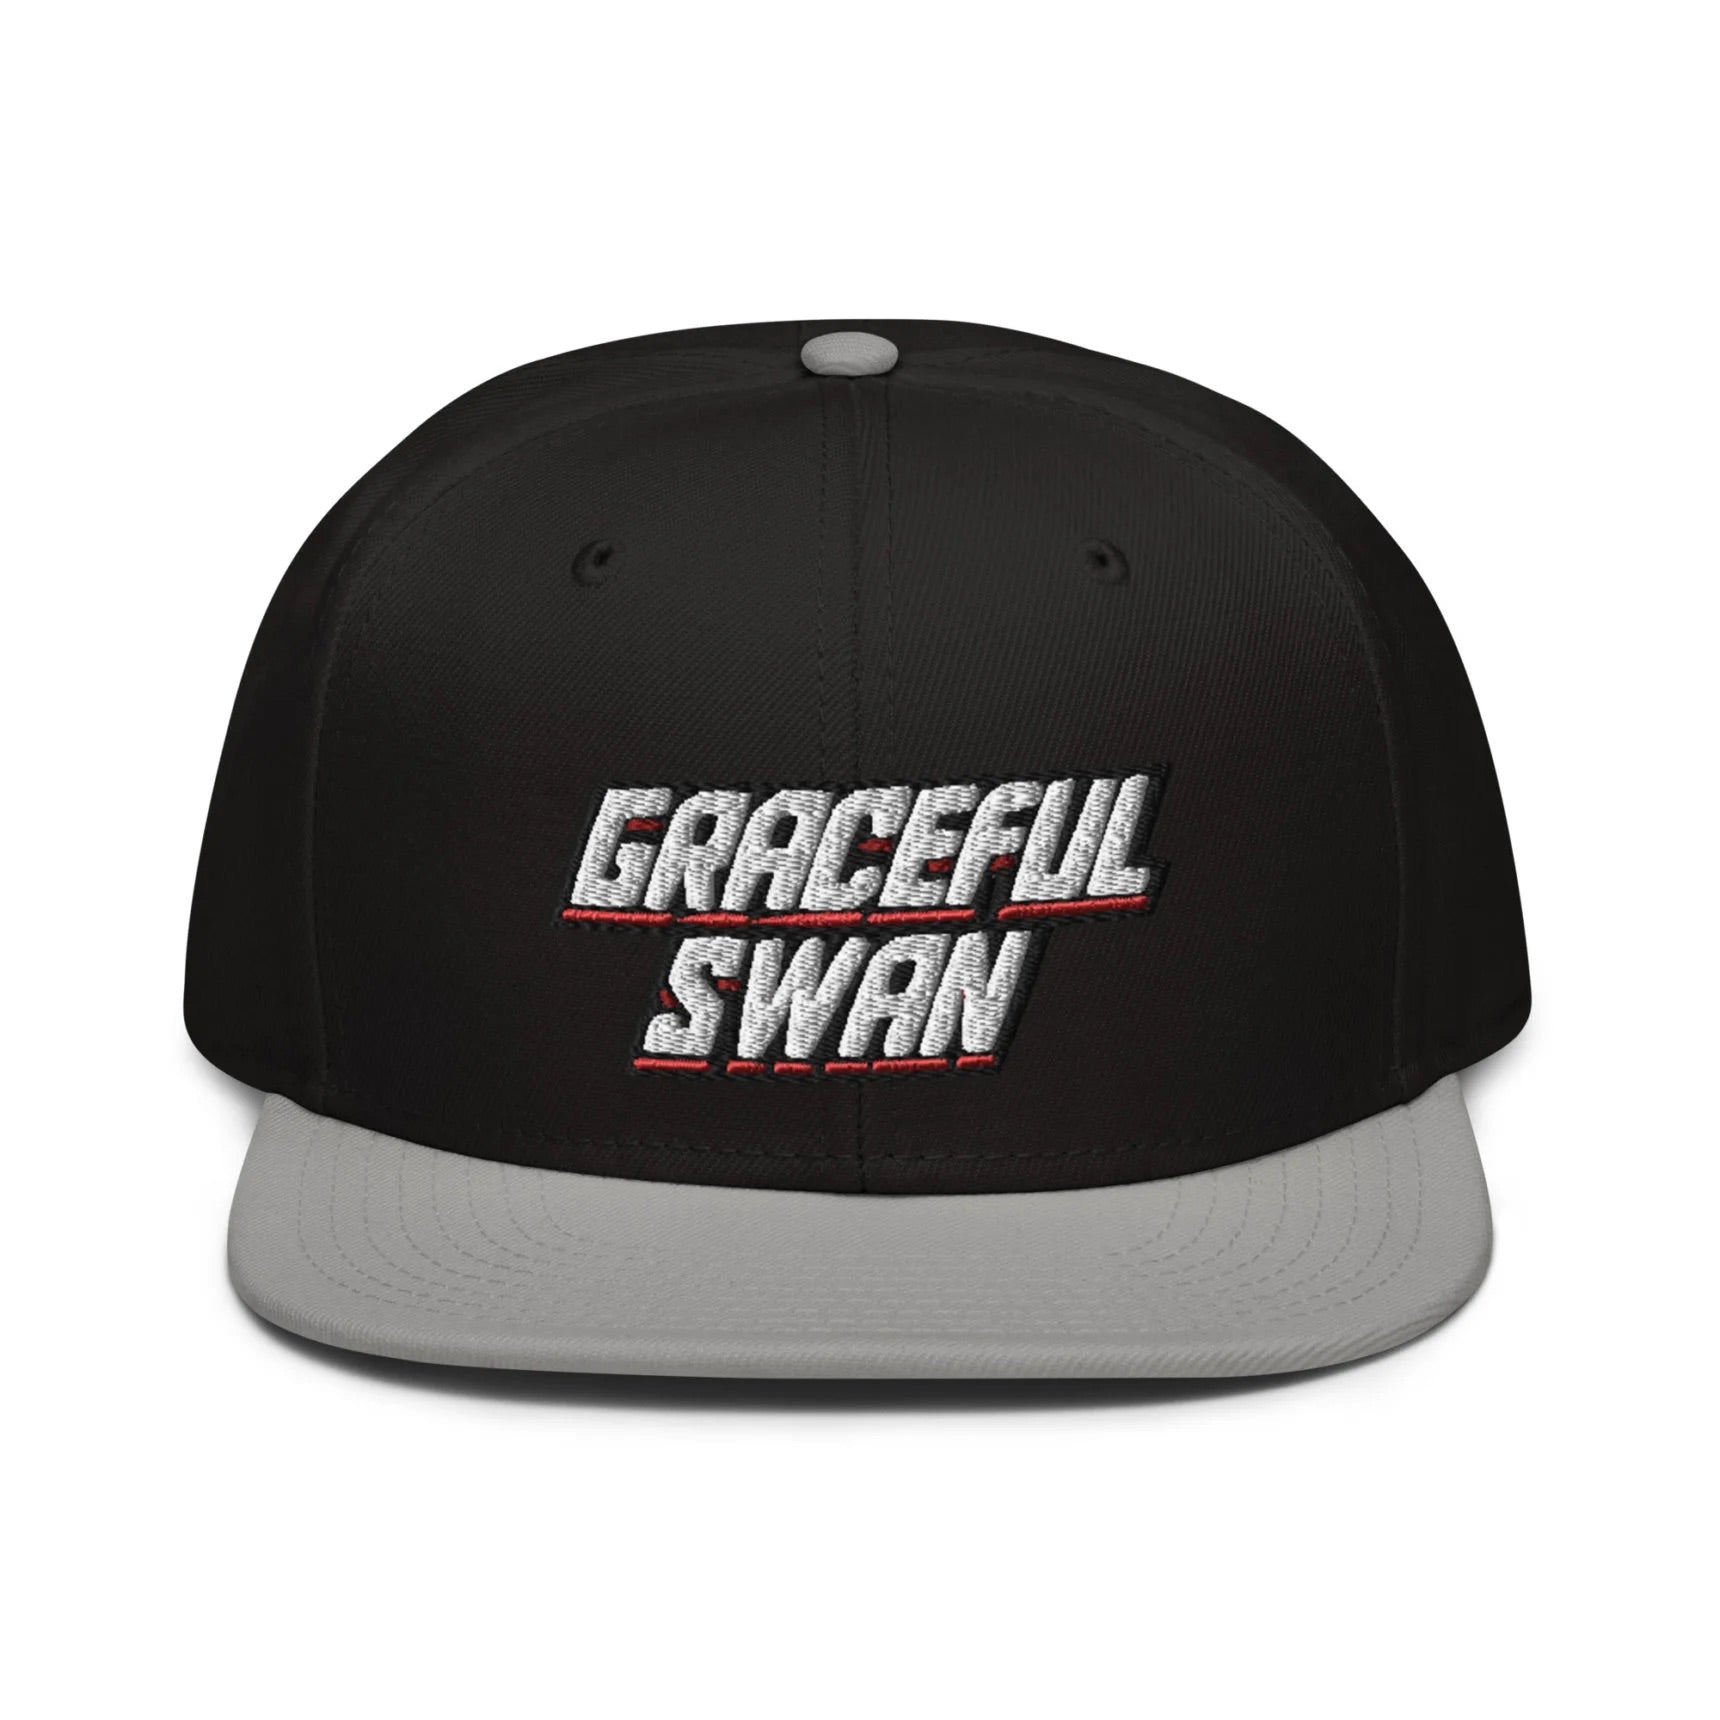 Graceful Swan ShowZone hat in black with grey brim and accents